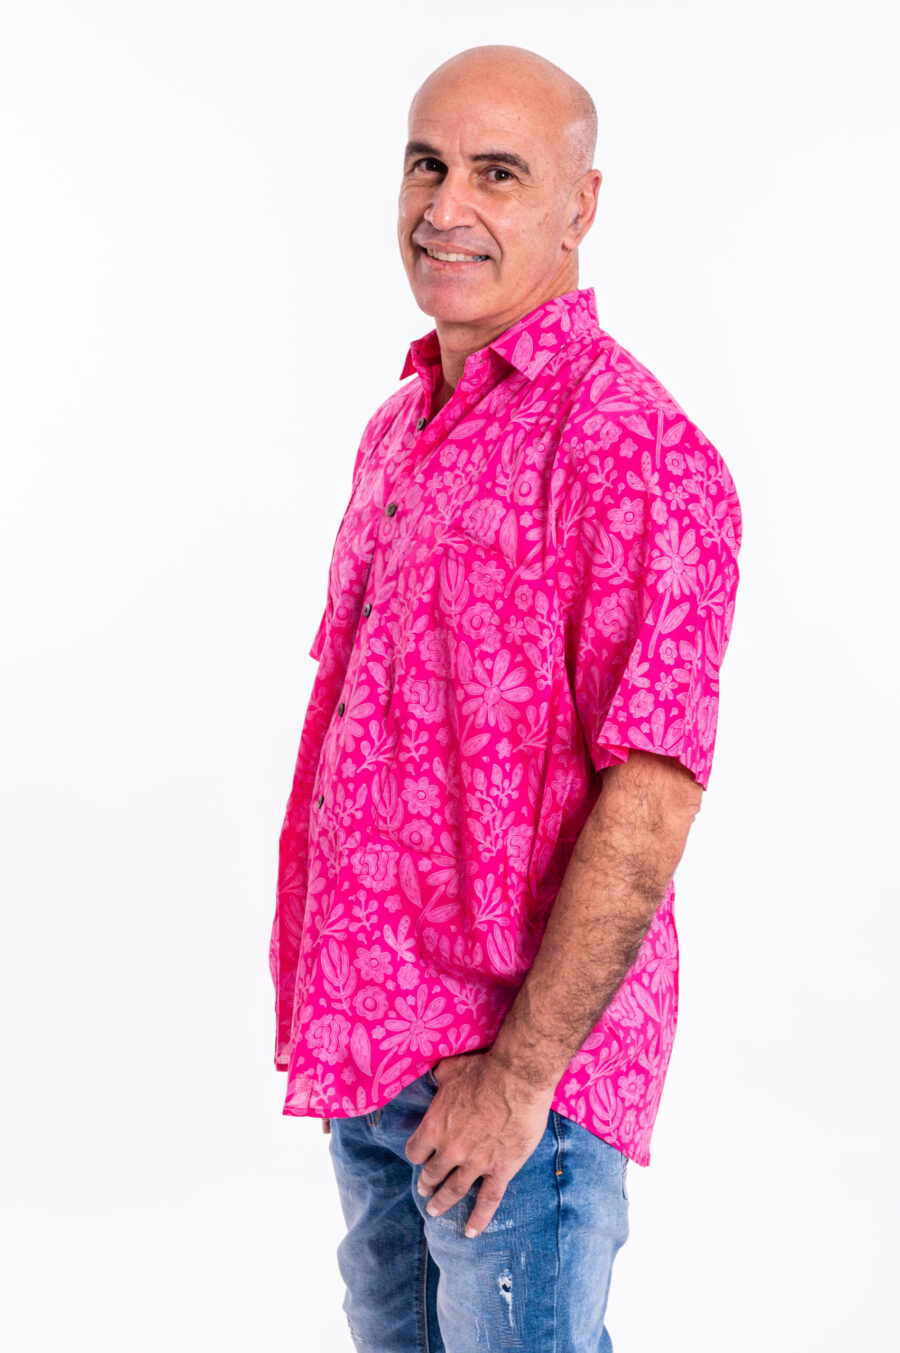 Unisex buttoned shirt for men and women | A pink buttoned shirt with light-pink flowers print - a unique design